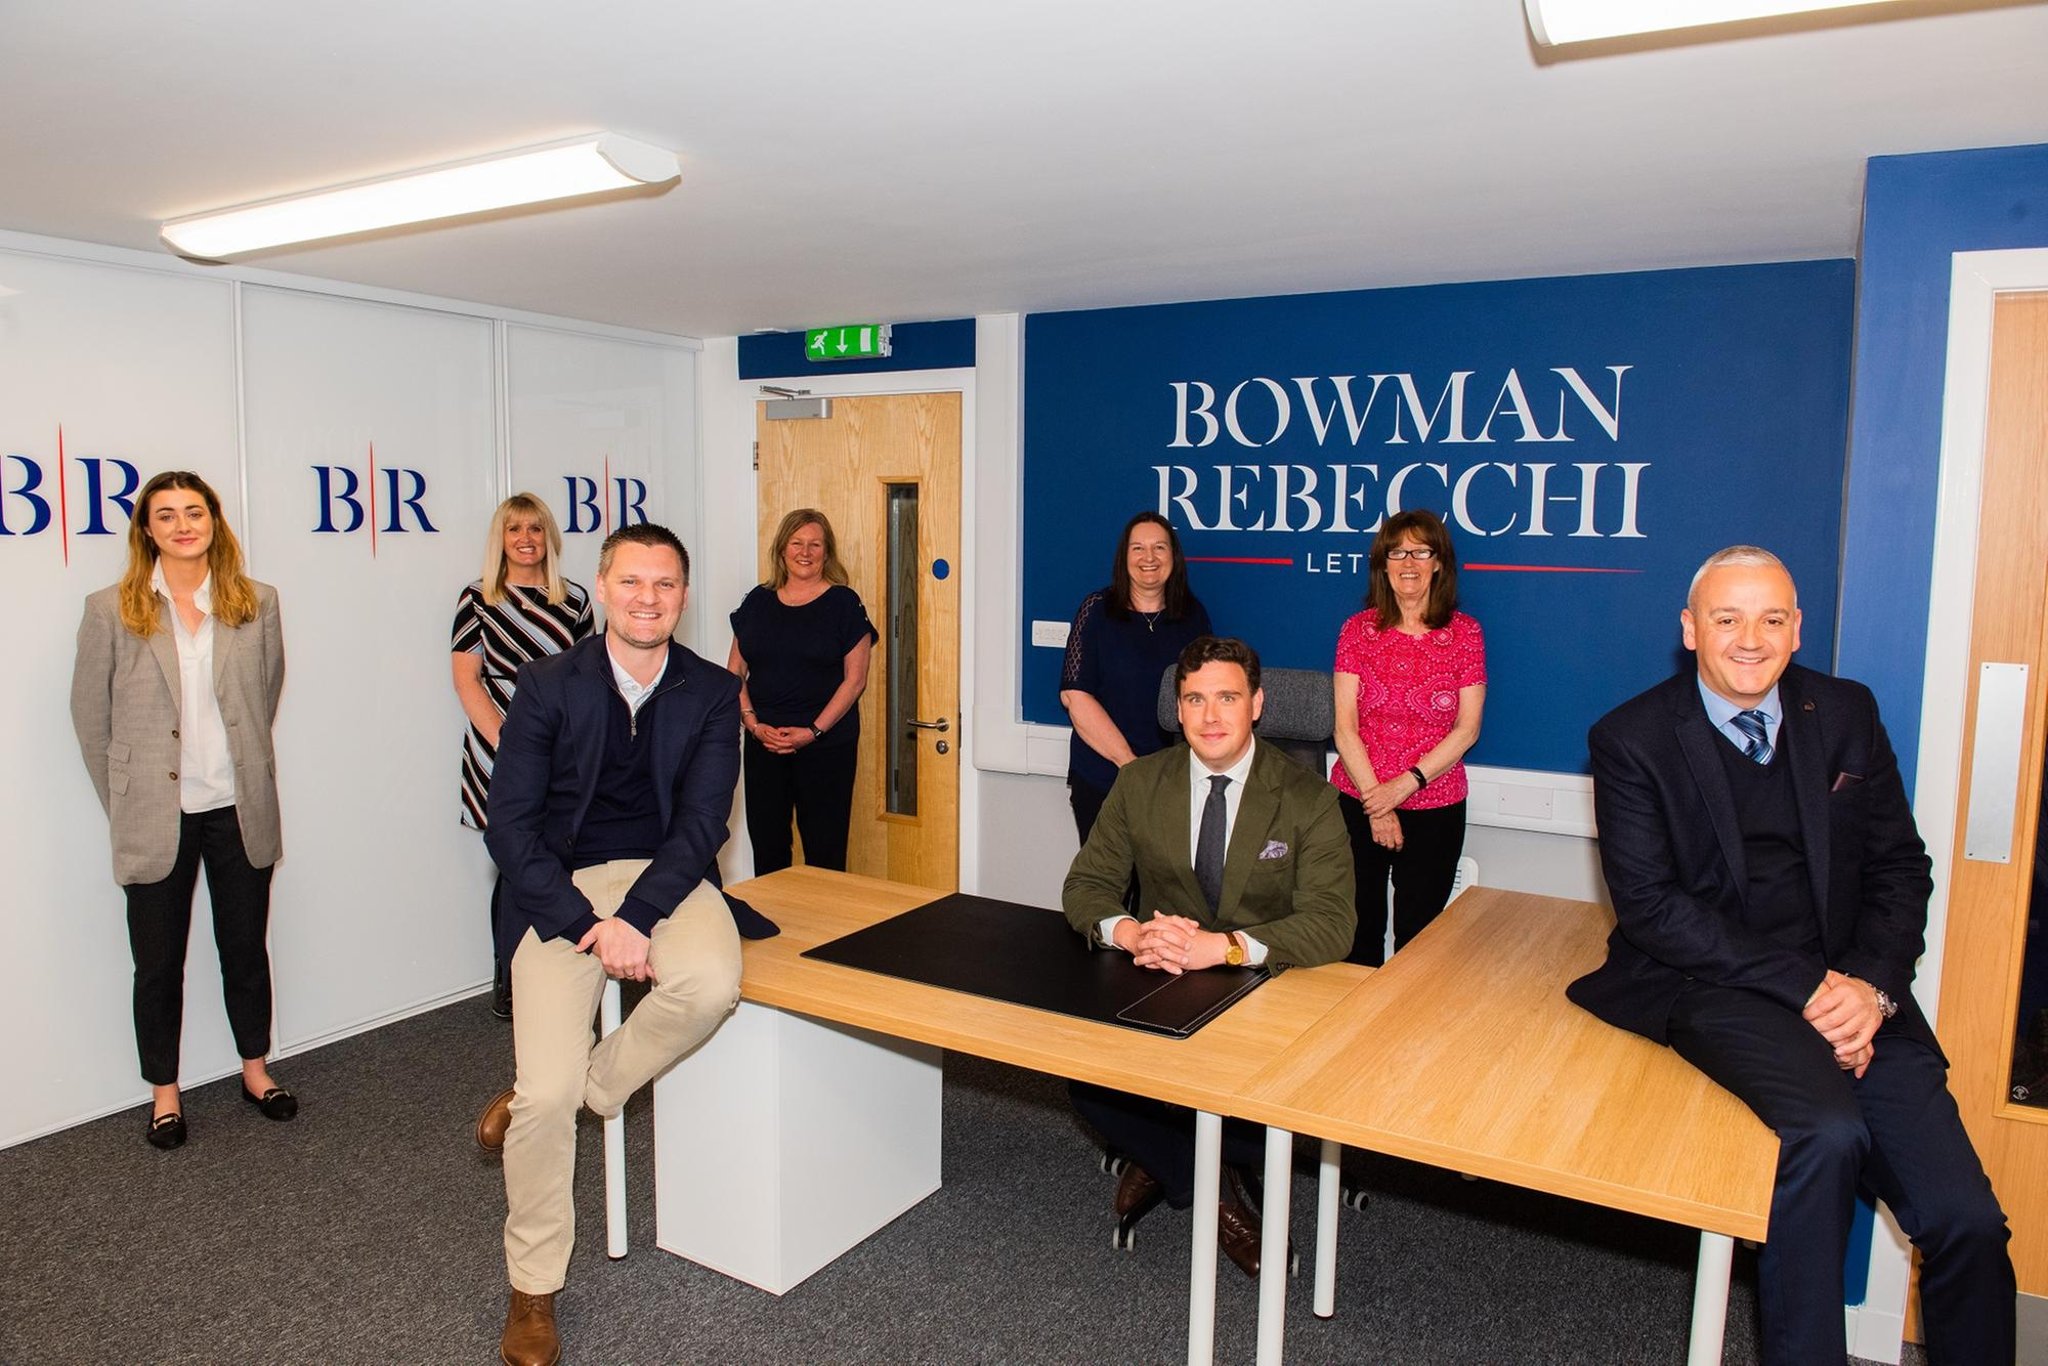 Inverclyde-based property specialist Bowman Rebecchi Letting swoops on rival